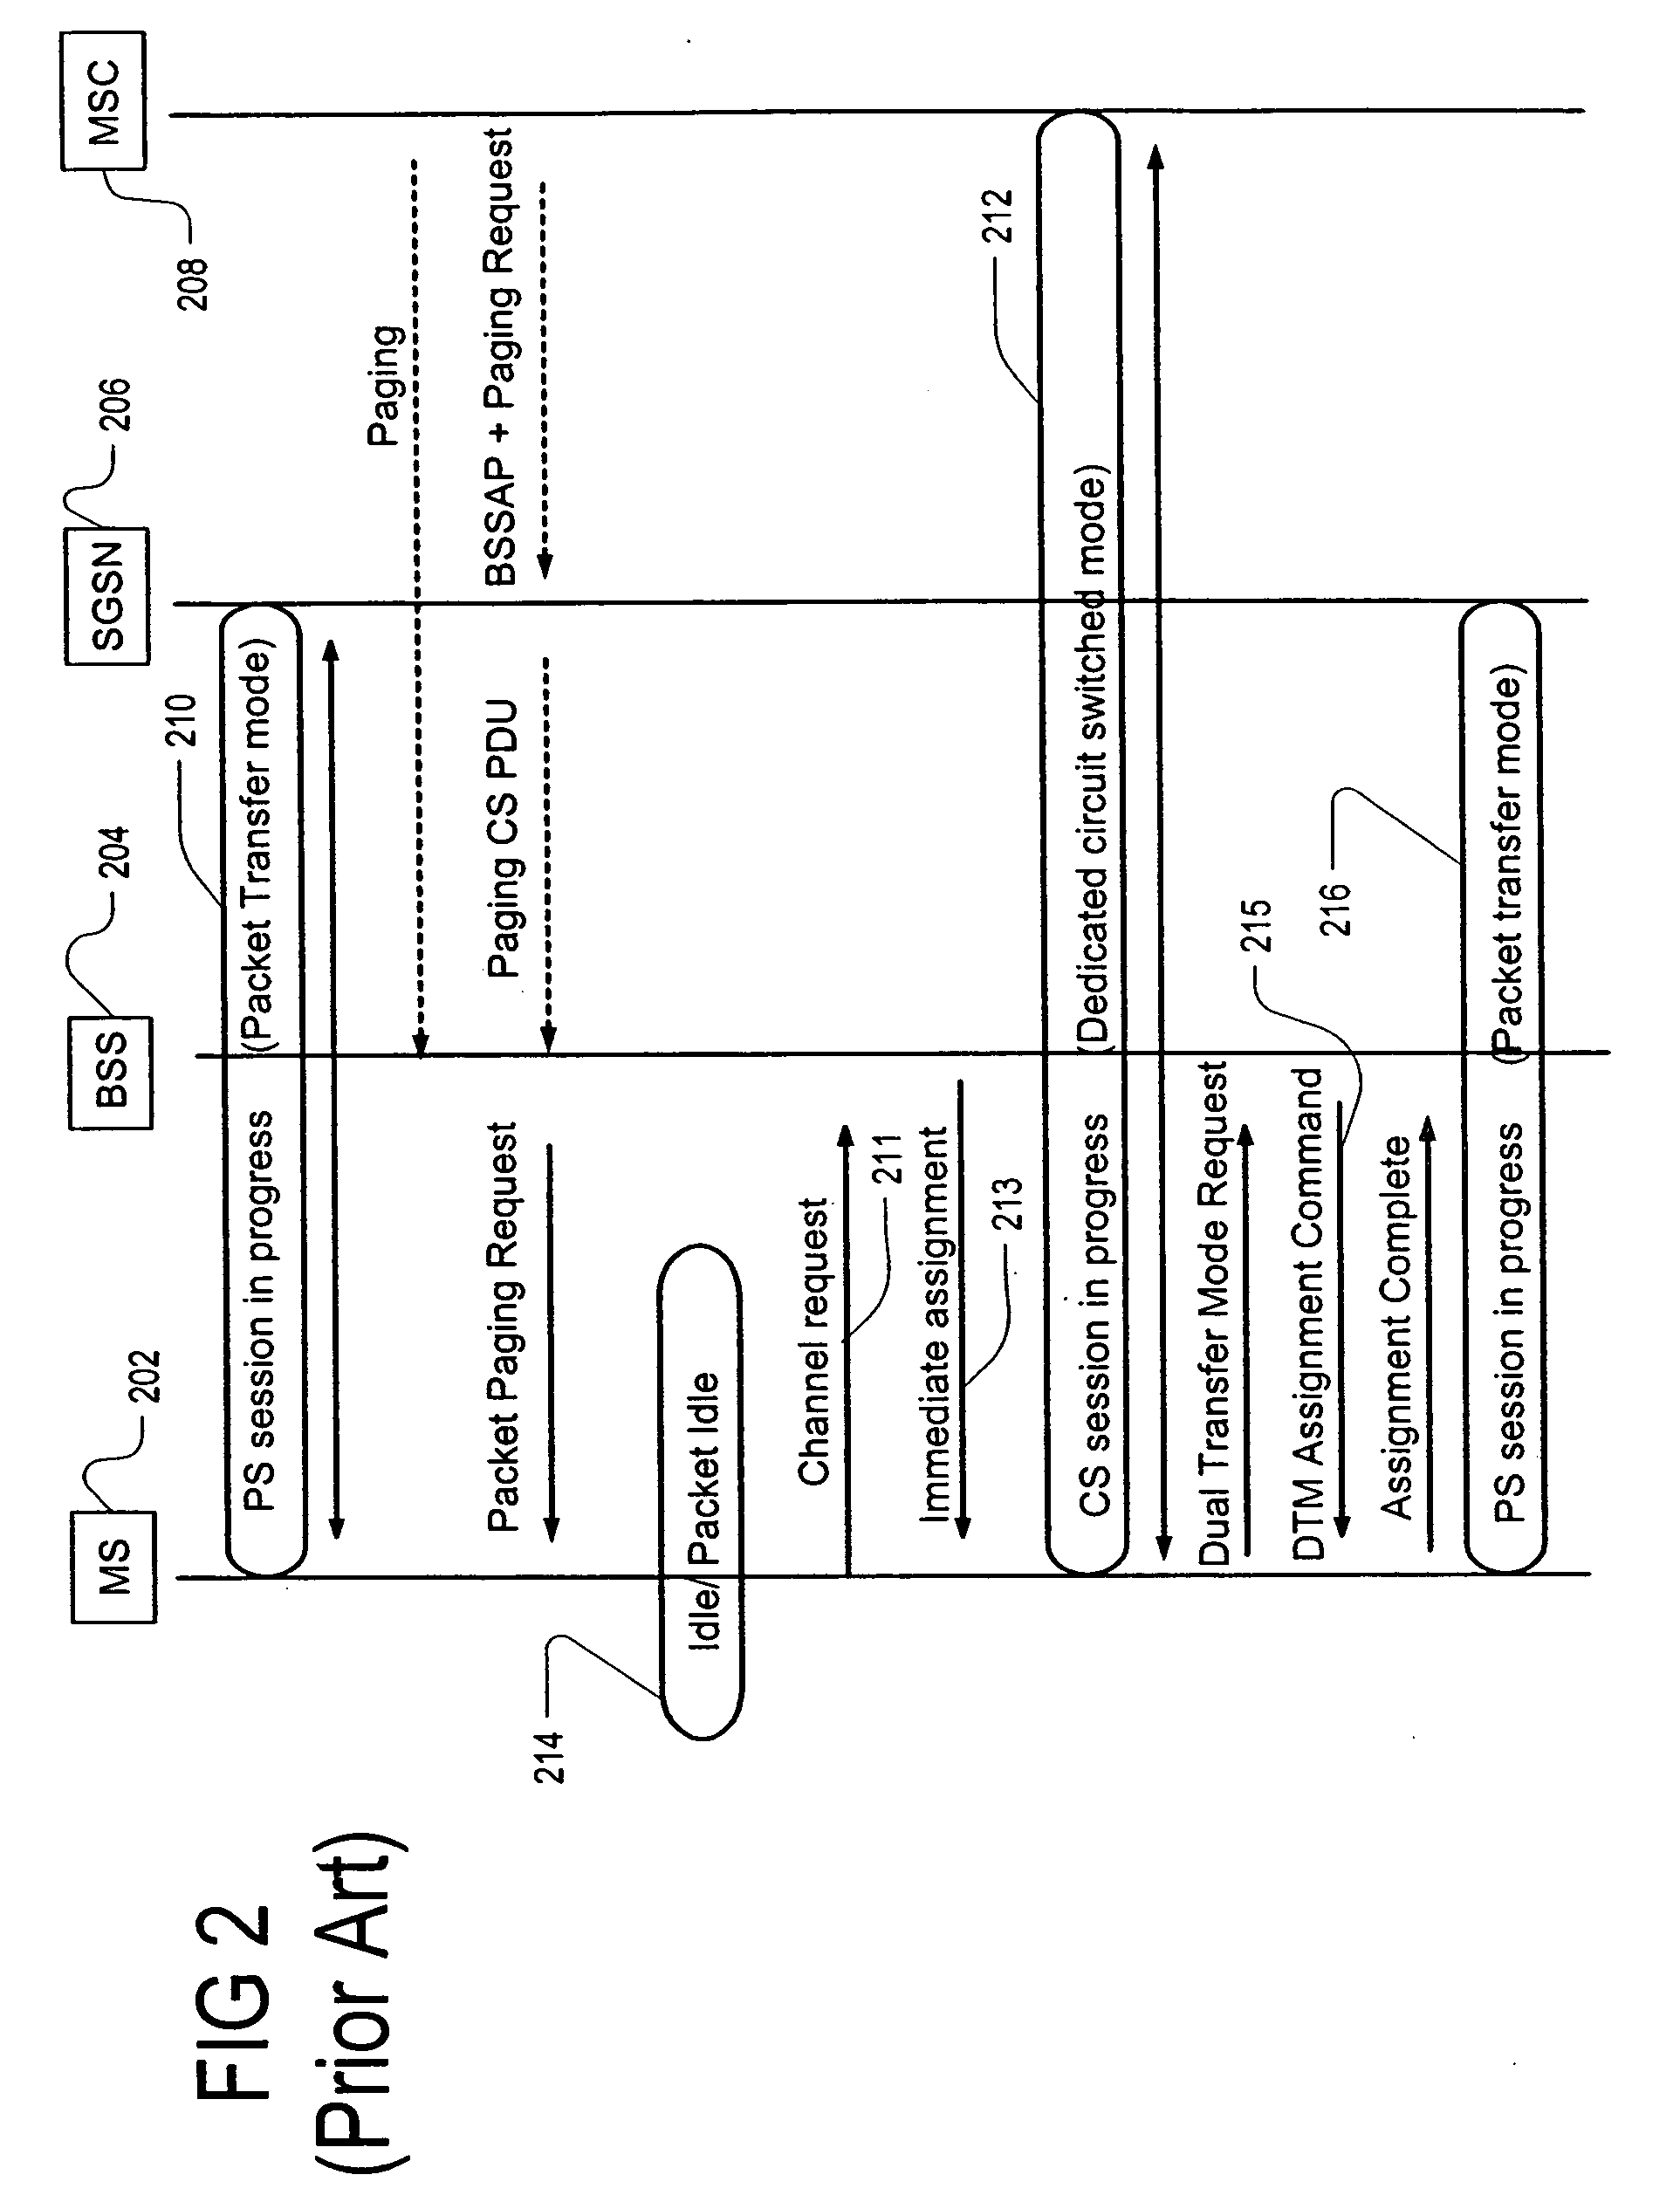 Enhancement of packet transfer mode when circuit switched resources are requested